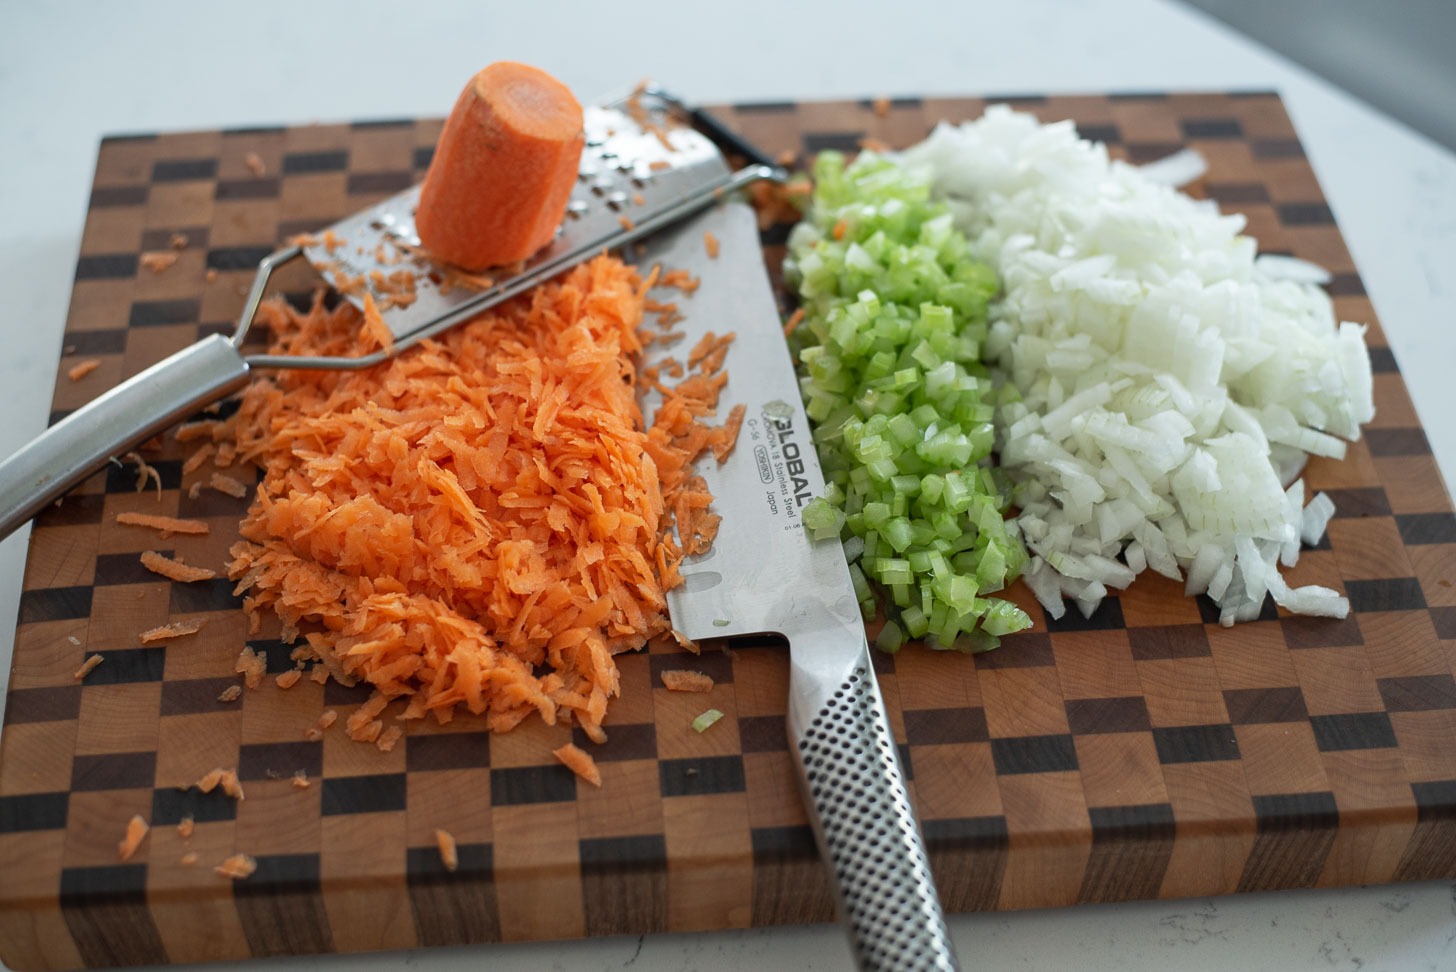 Onion, celery, carrot are finely chopped to make spaghetti sauce.